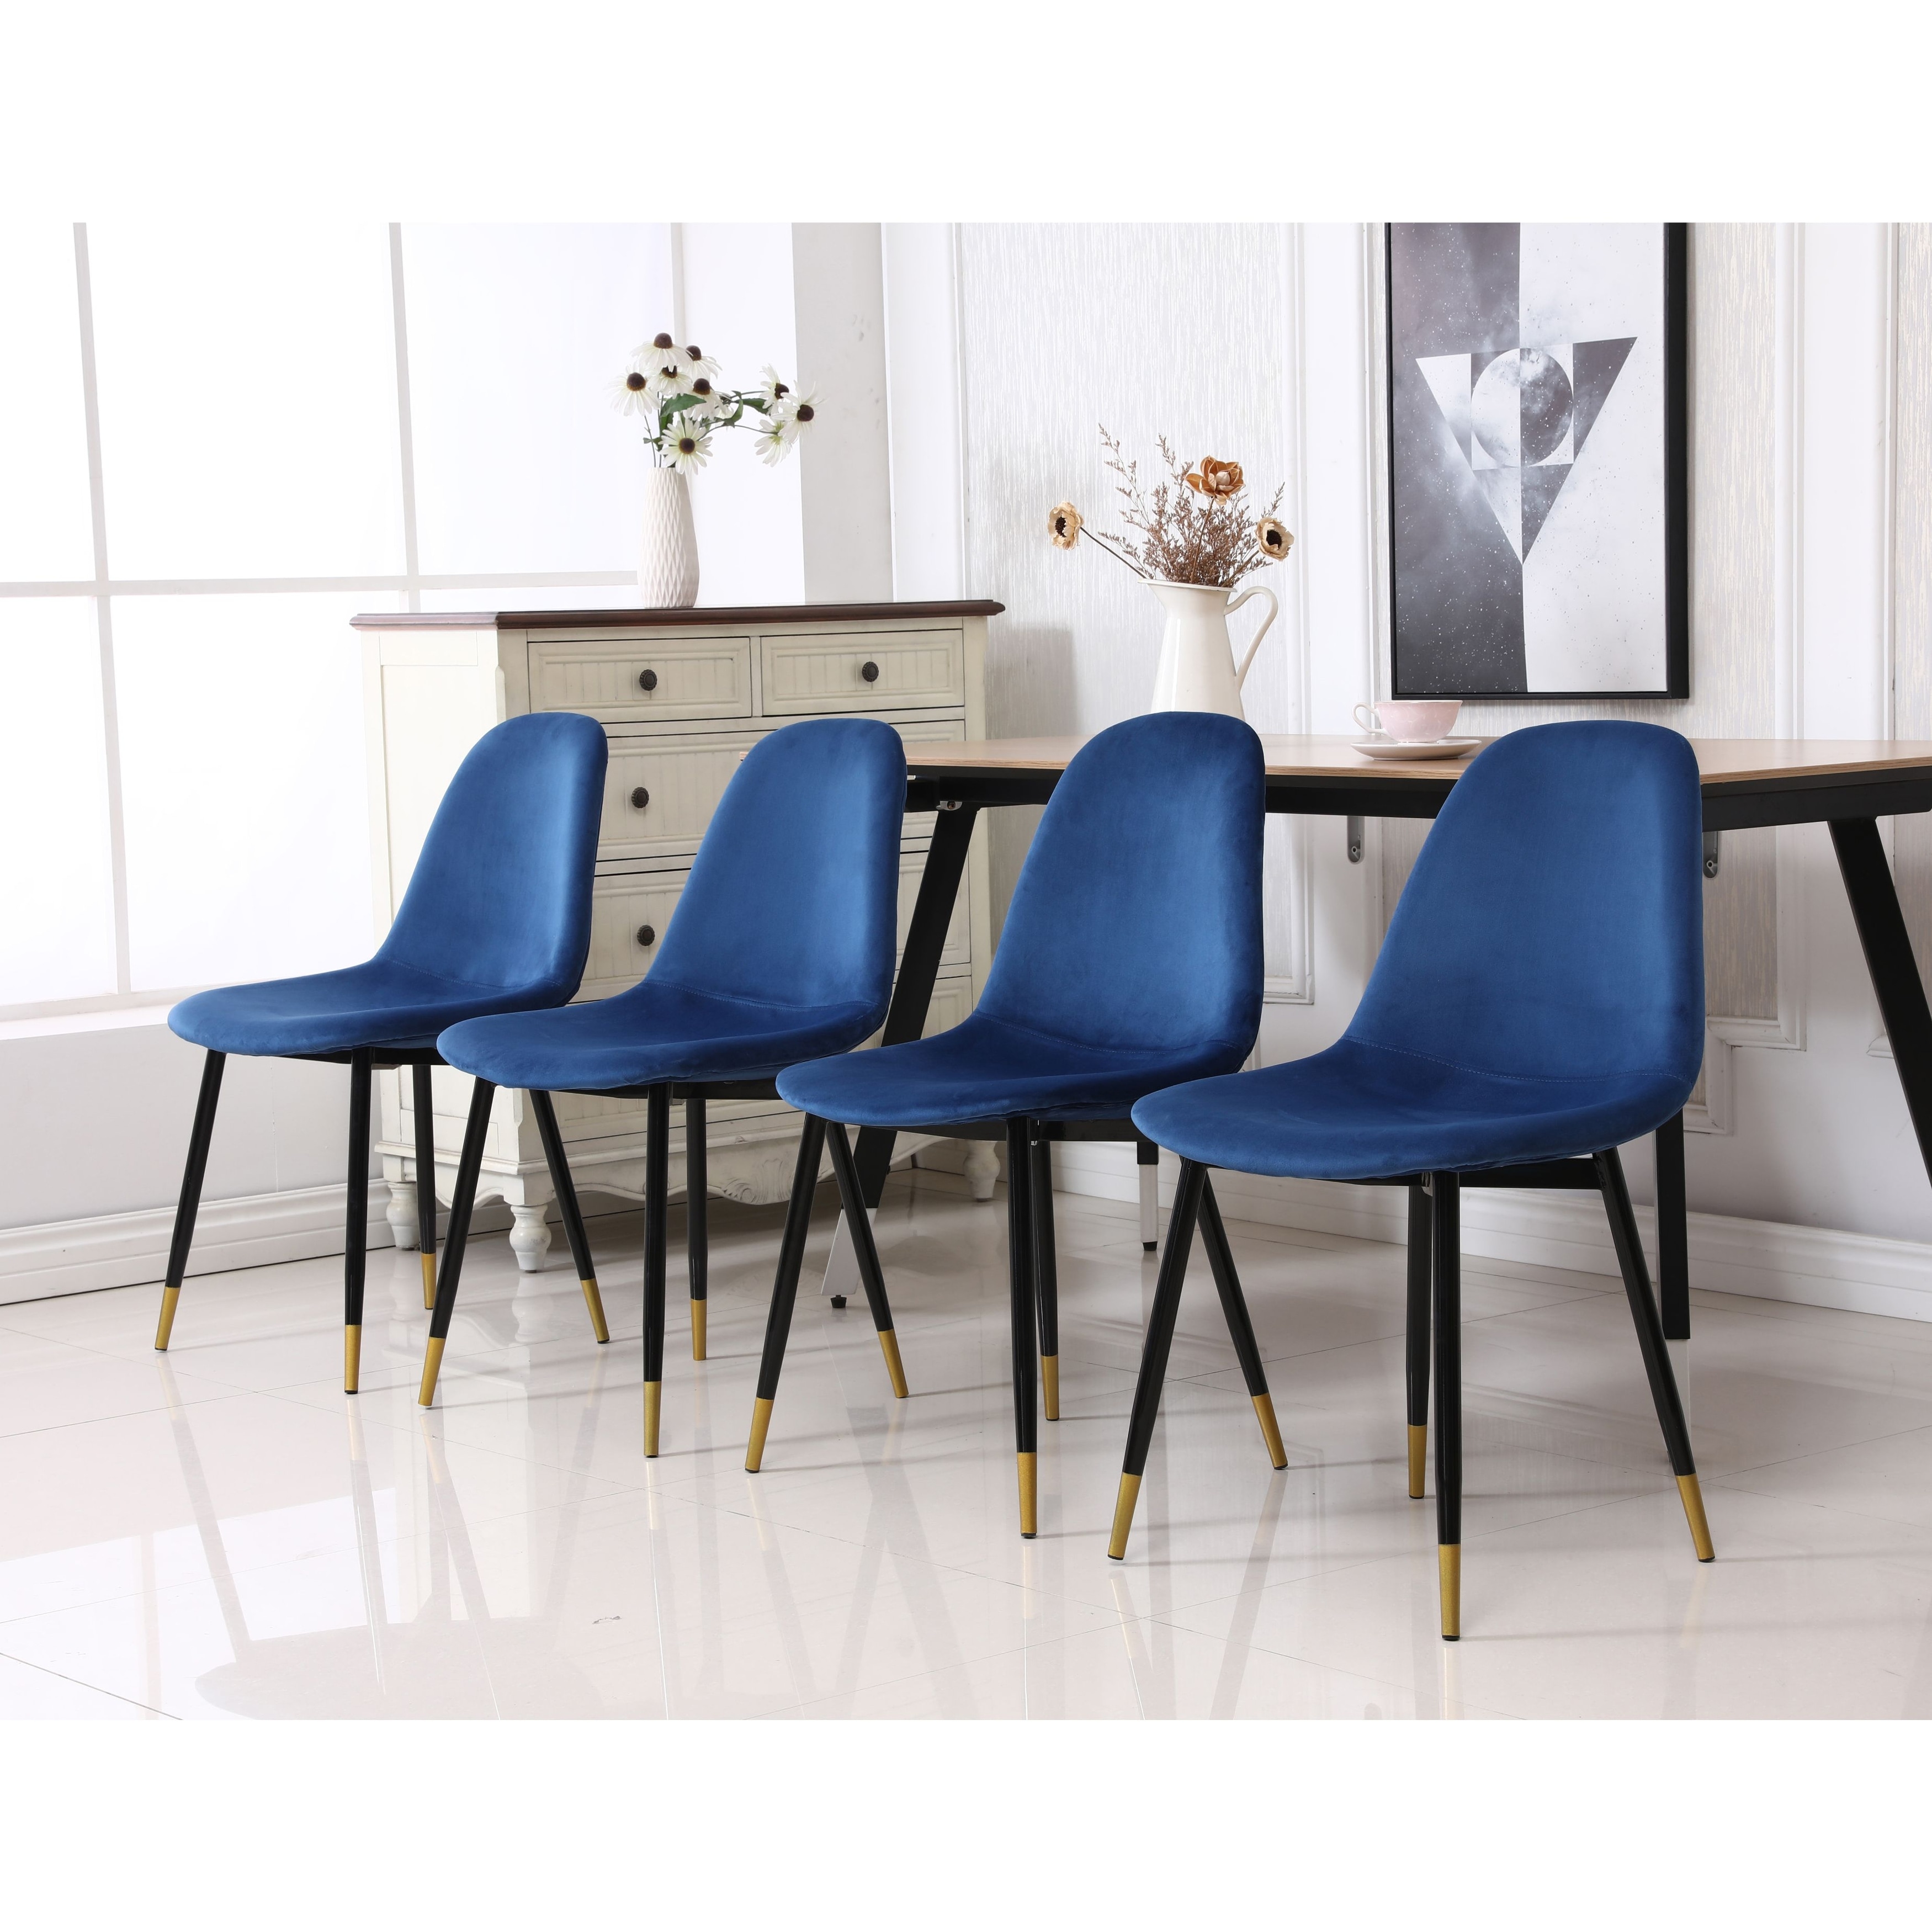 lassan contemporary fabric upholstered dining chairs set of 4